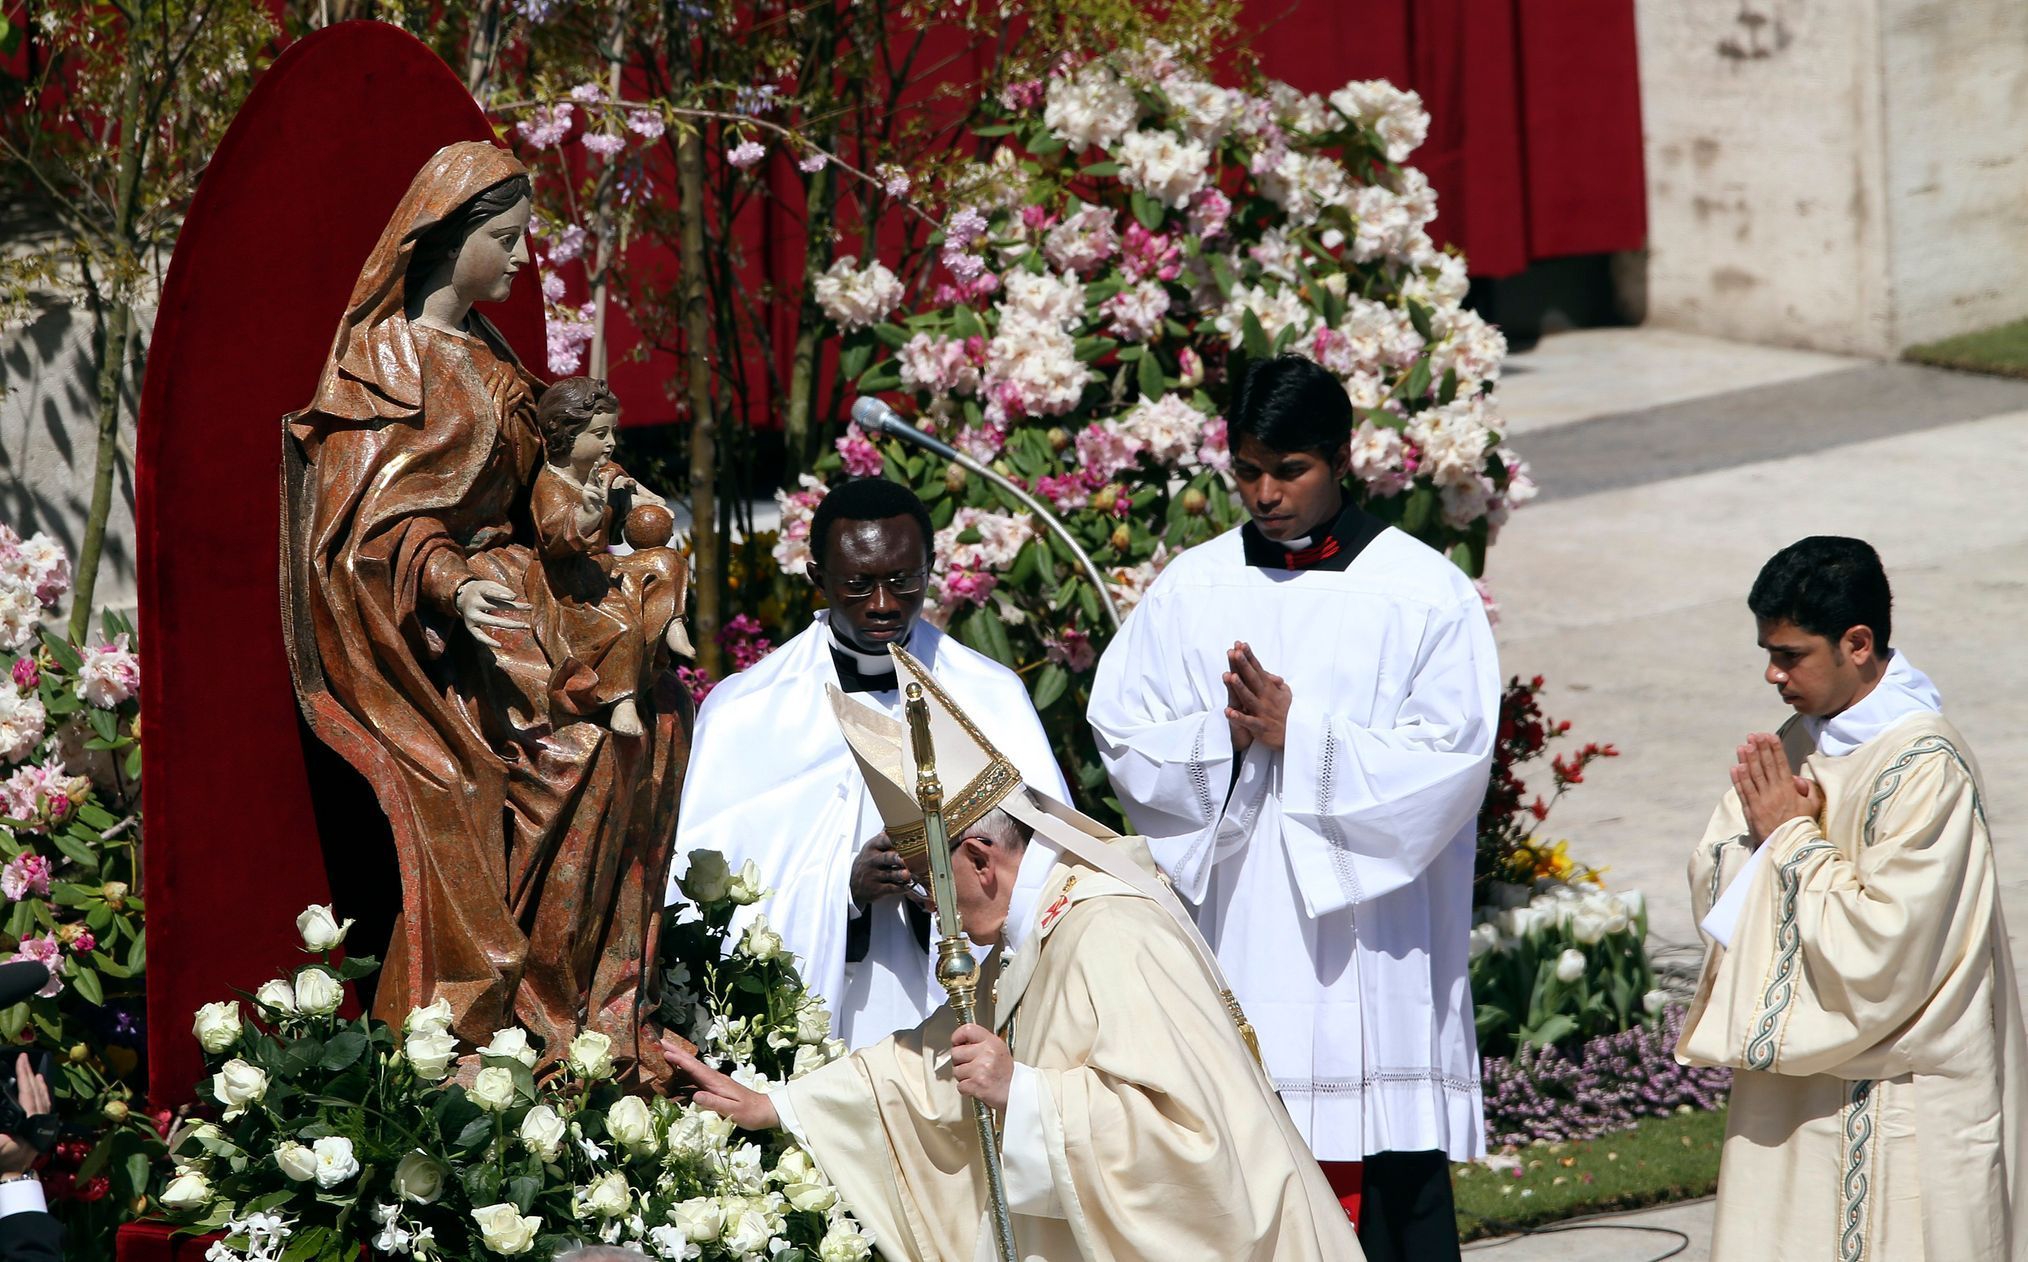 Pope Francis touches a statue of Virgin Mary as he leads the Easter mass in Saint Peter's Square at the Vatican